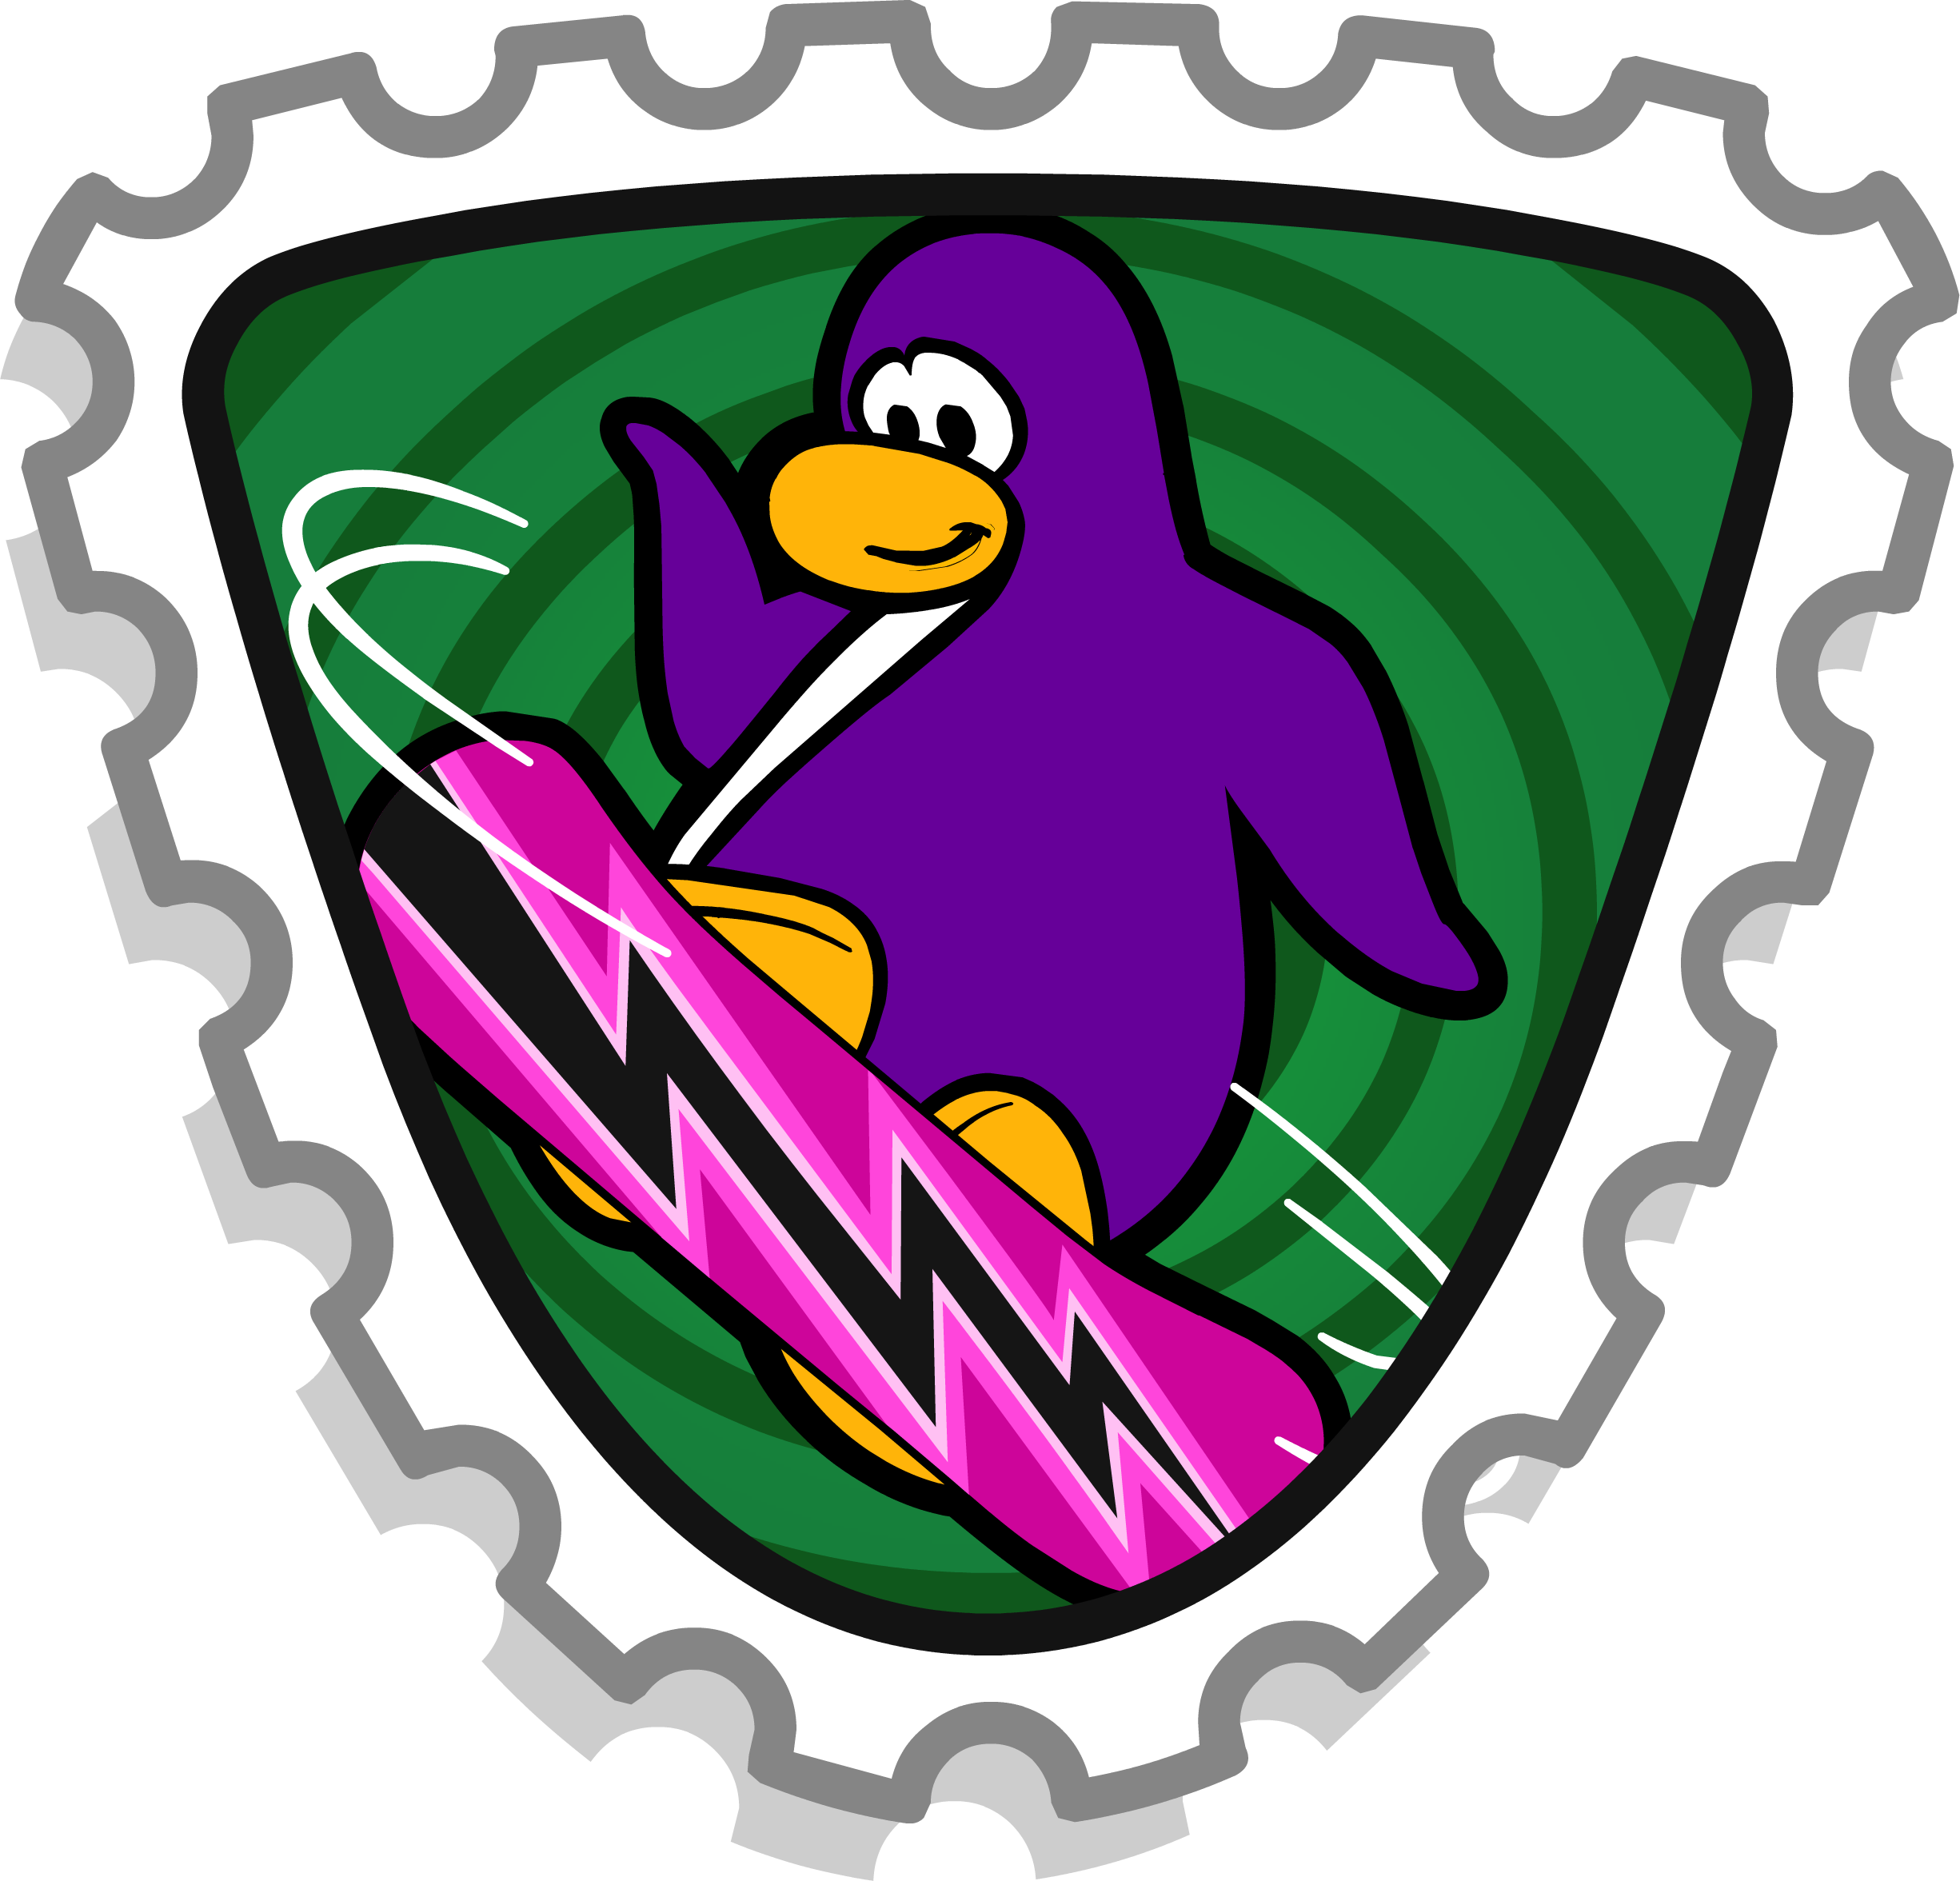 Information - Club Penguin Extreme Stamp (2451x2352)